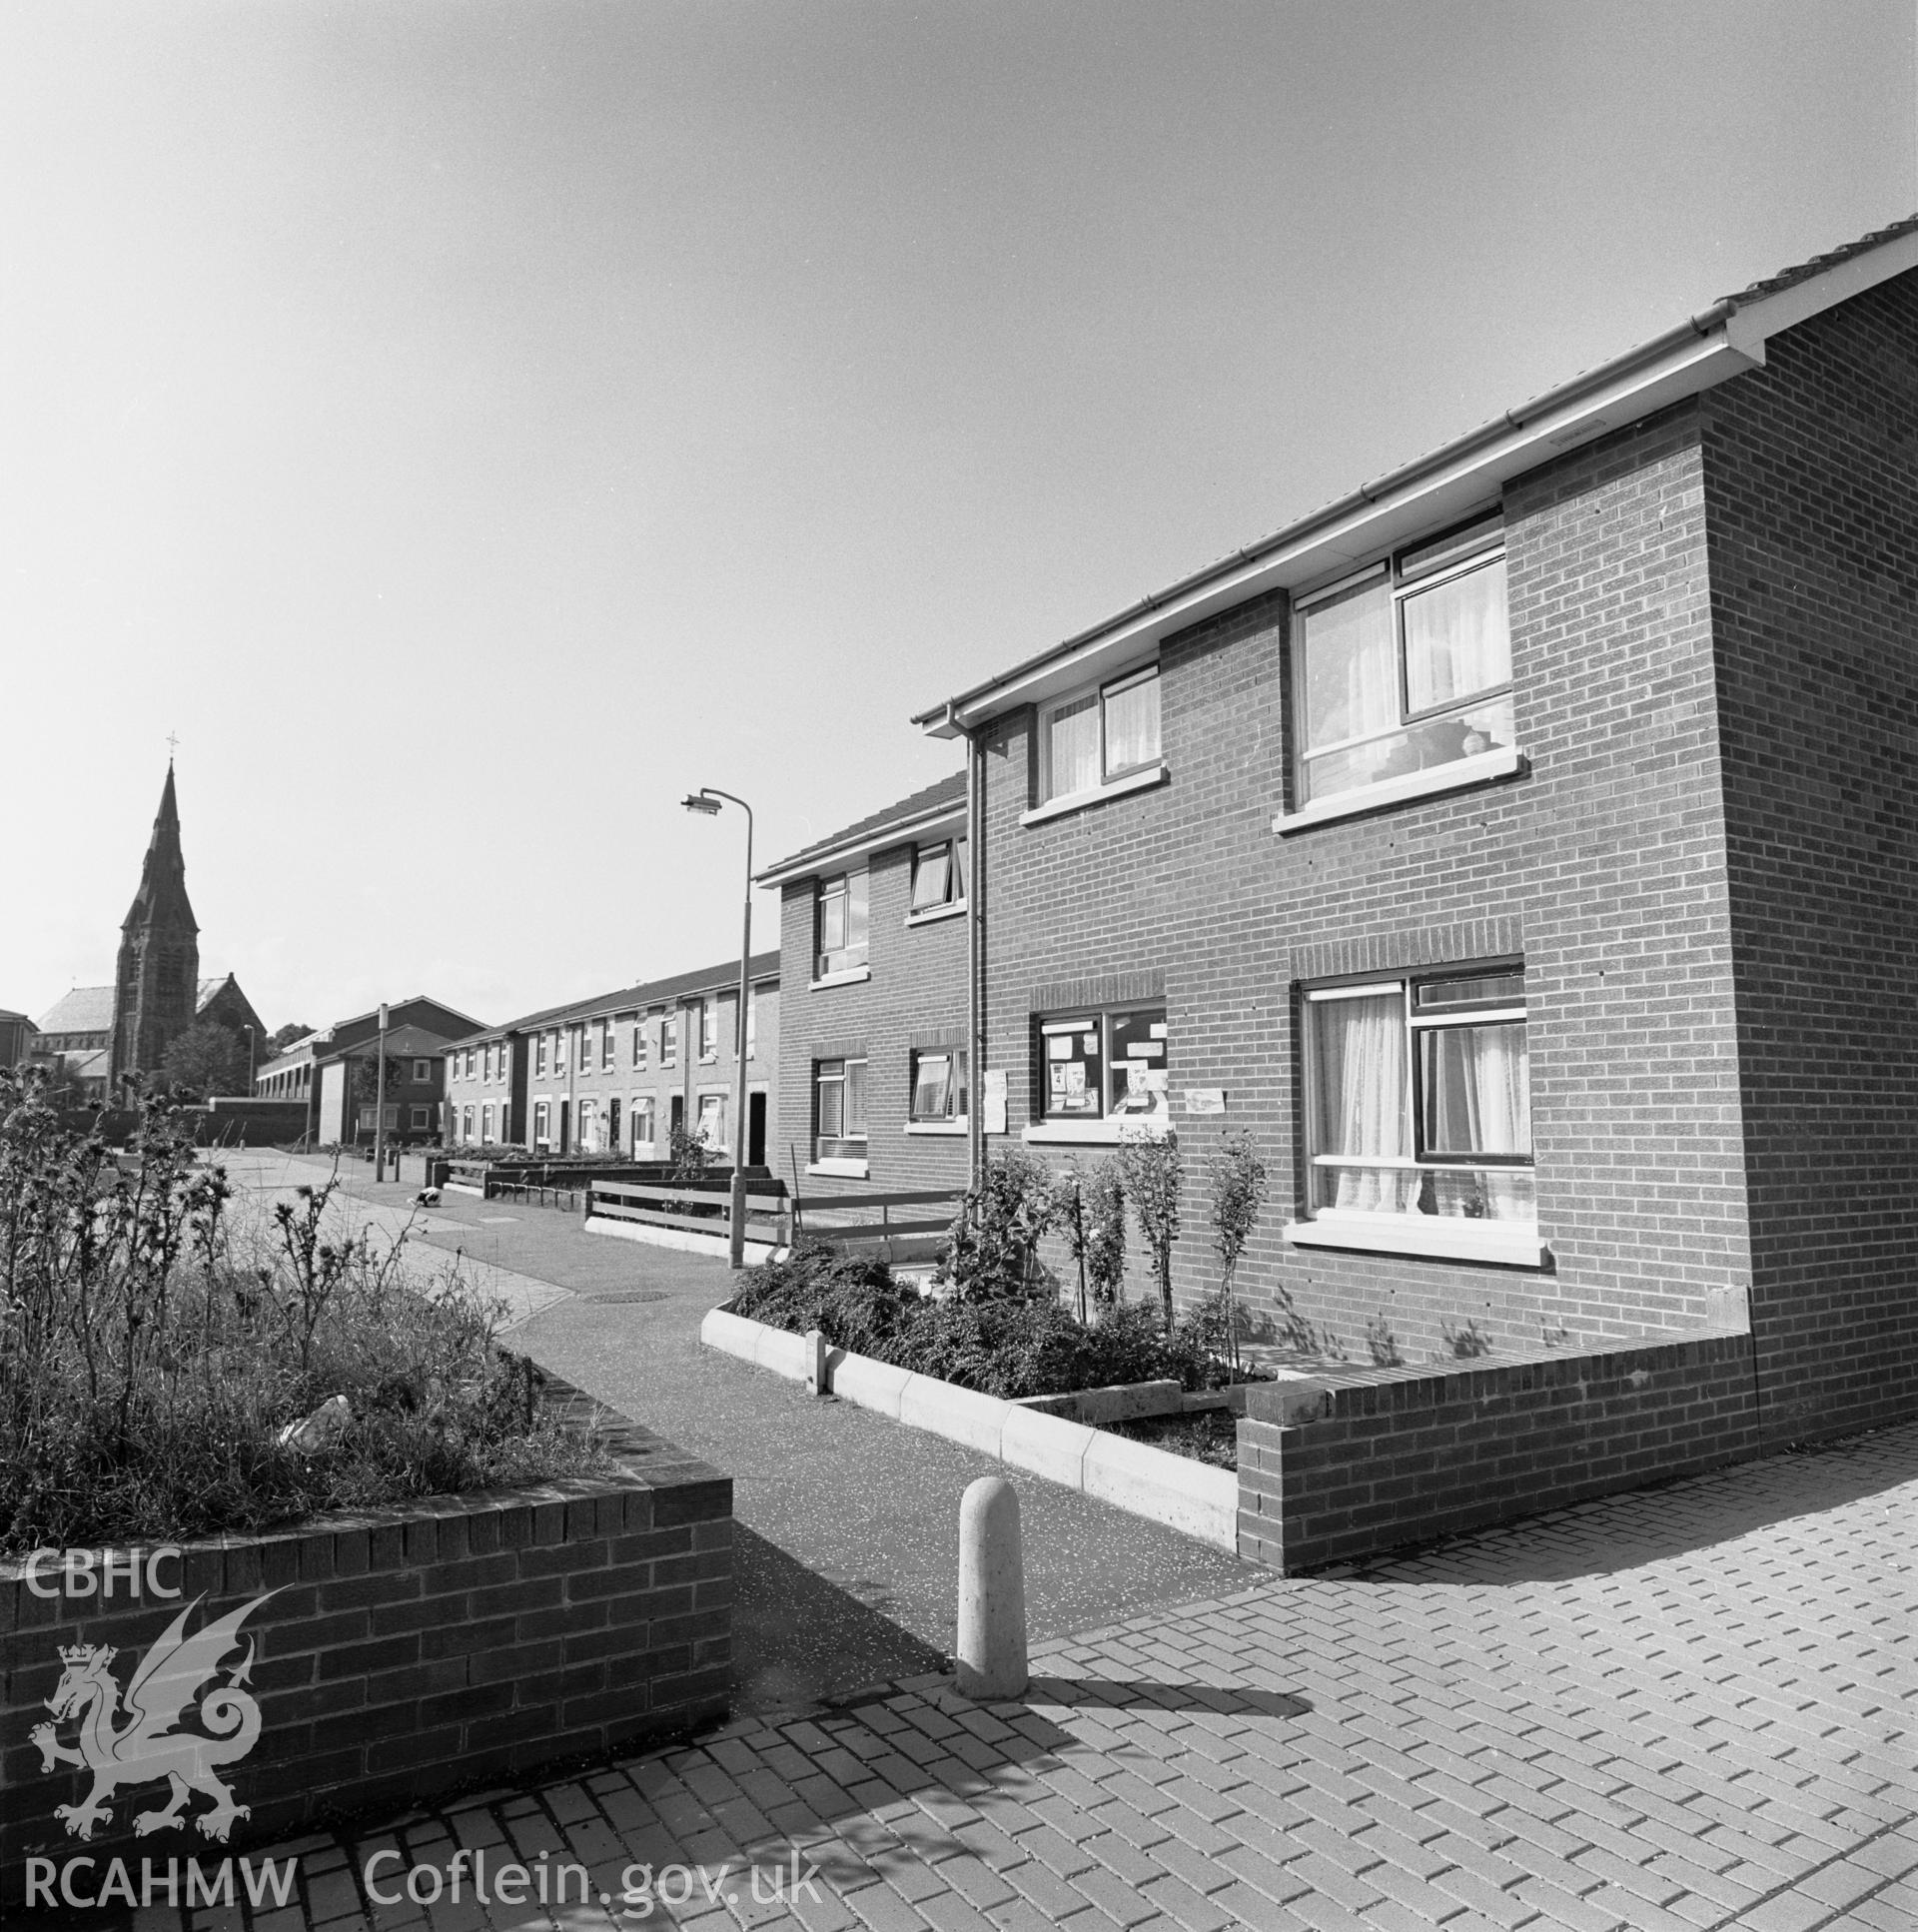 Photographic negative showing new housing at Newport; collated by the former Central Office of Information.